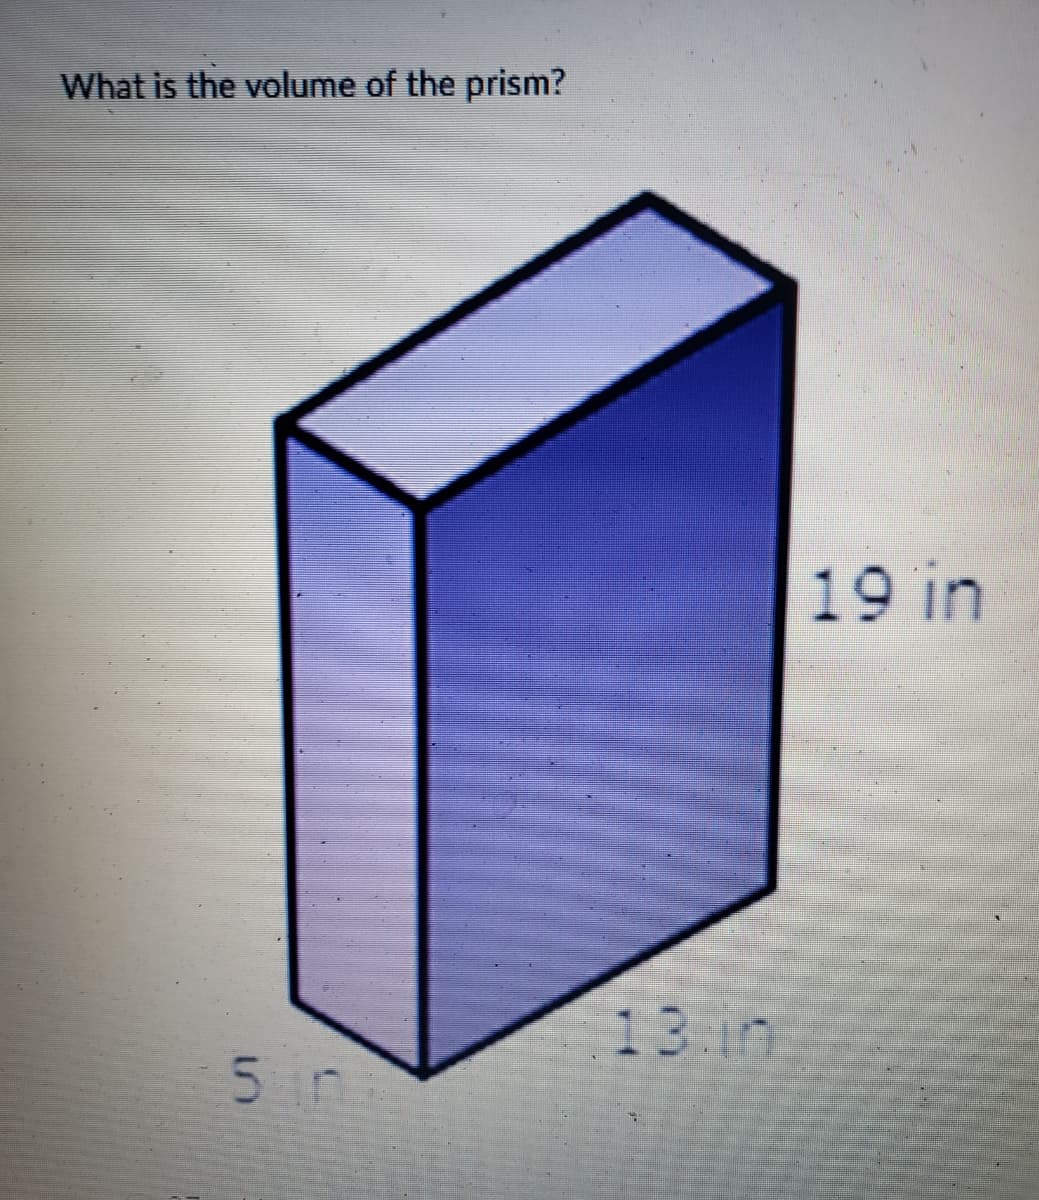 What is the volume of the prism?
5
19 in